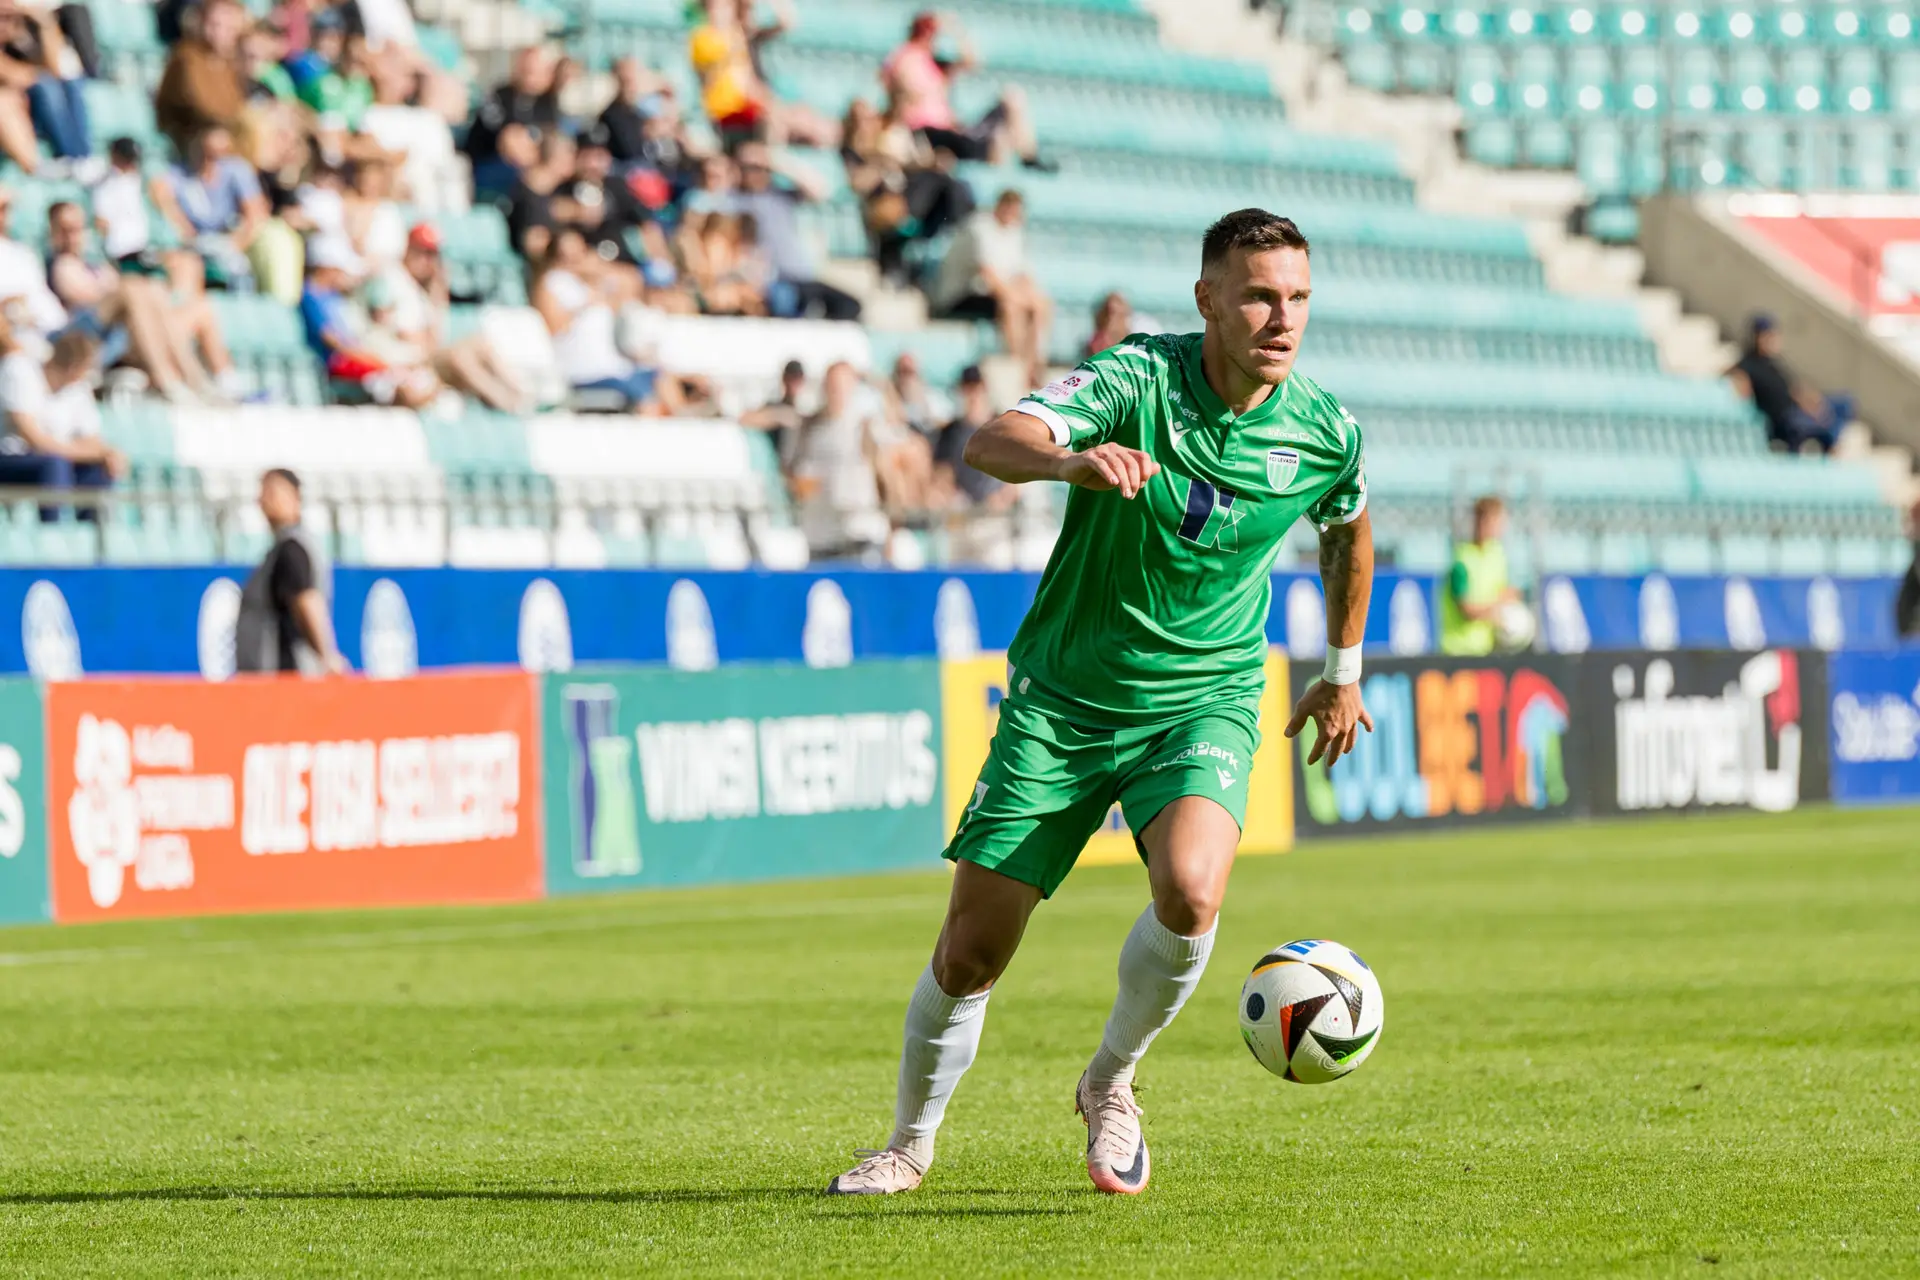 FCI Levadia secured a second consecutive 0-0 draw